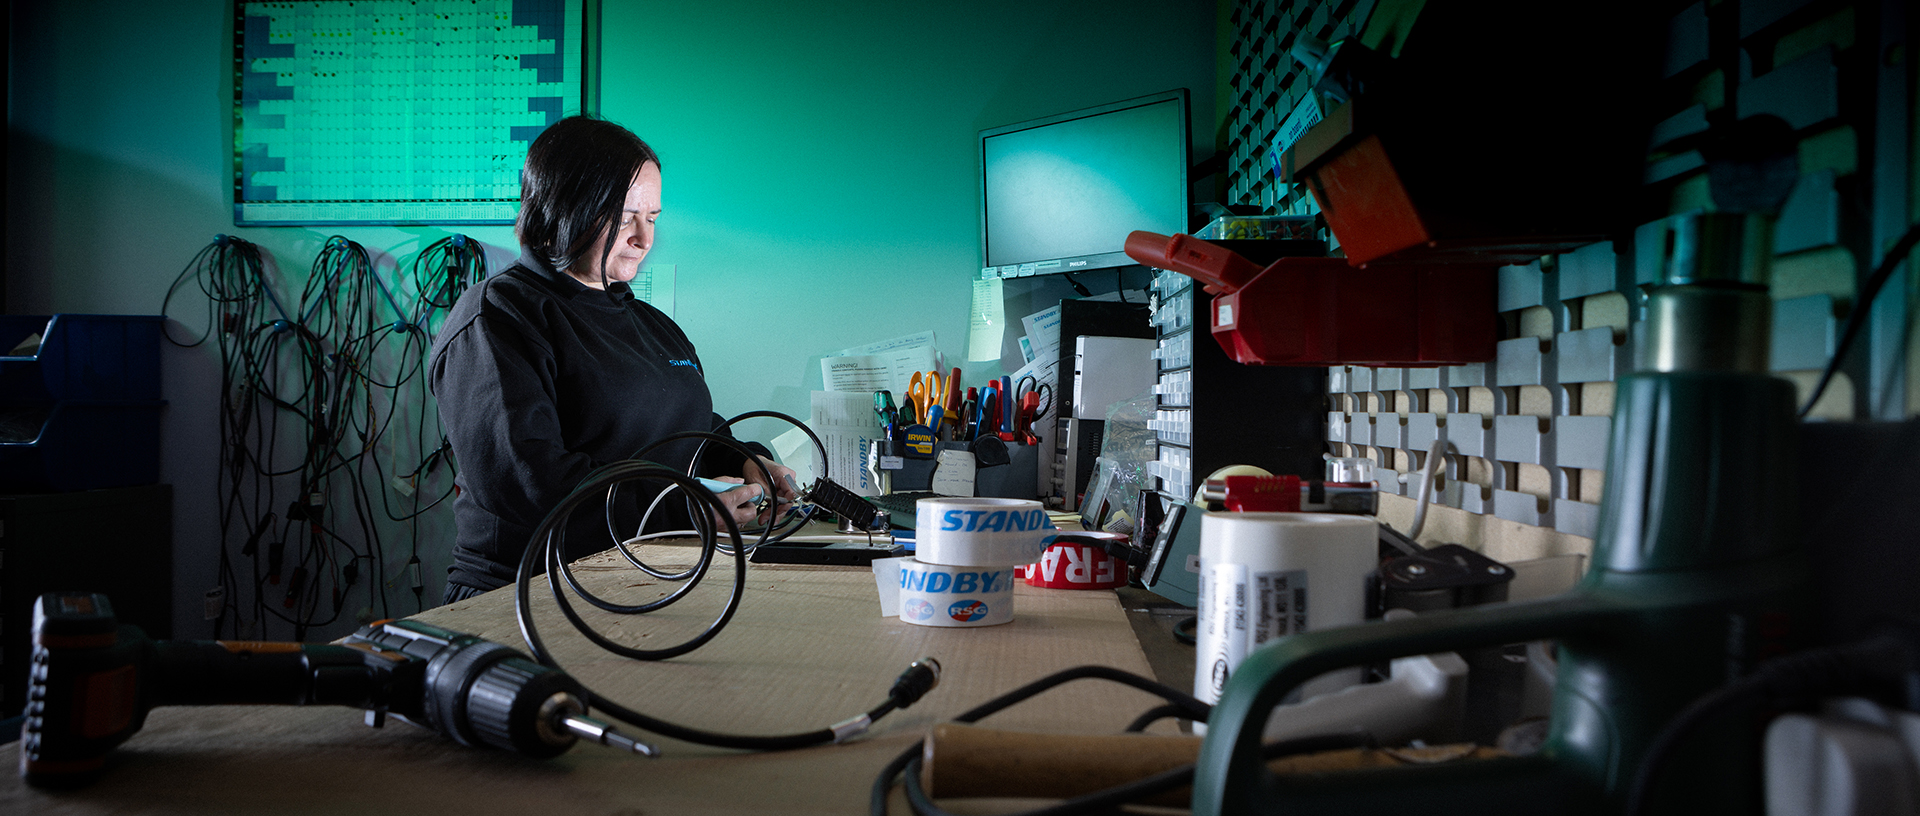 Worker is standing at workbench soldering and looking down at her work, the workbench runs towards the camera with various tools and equipment on. The background of the image is lit green.